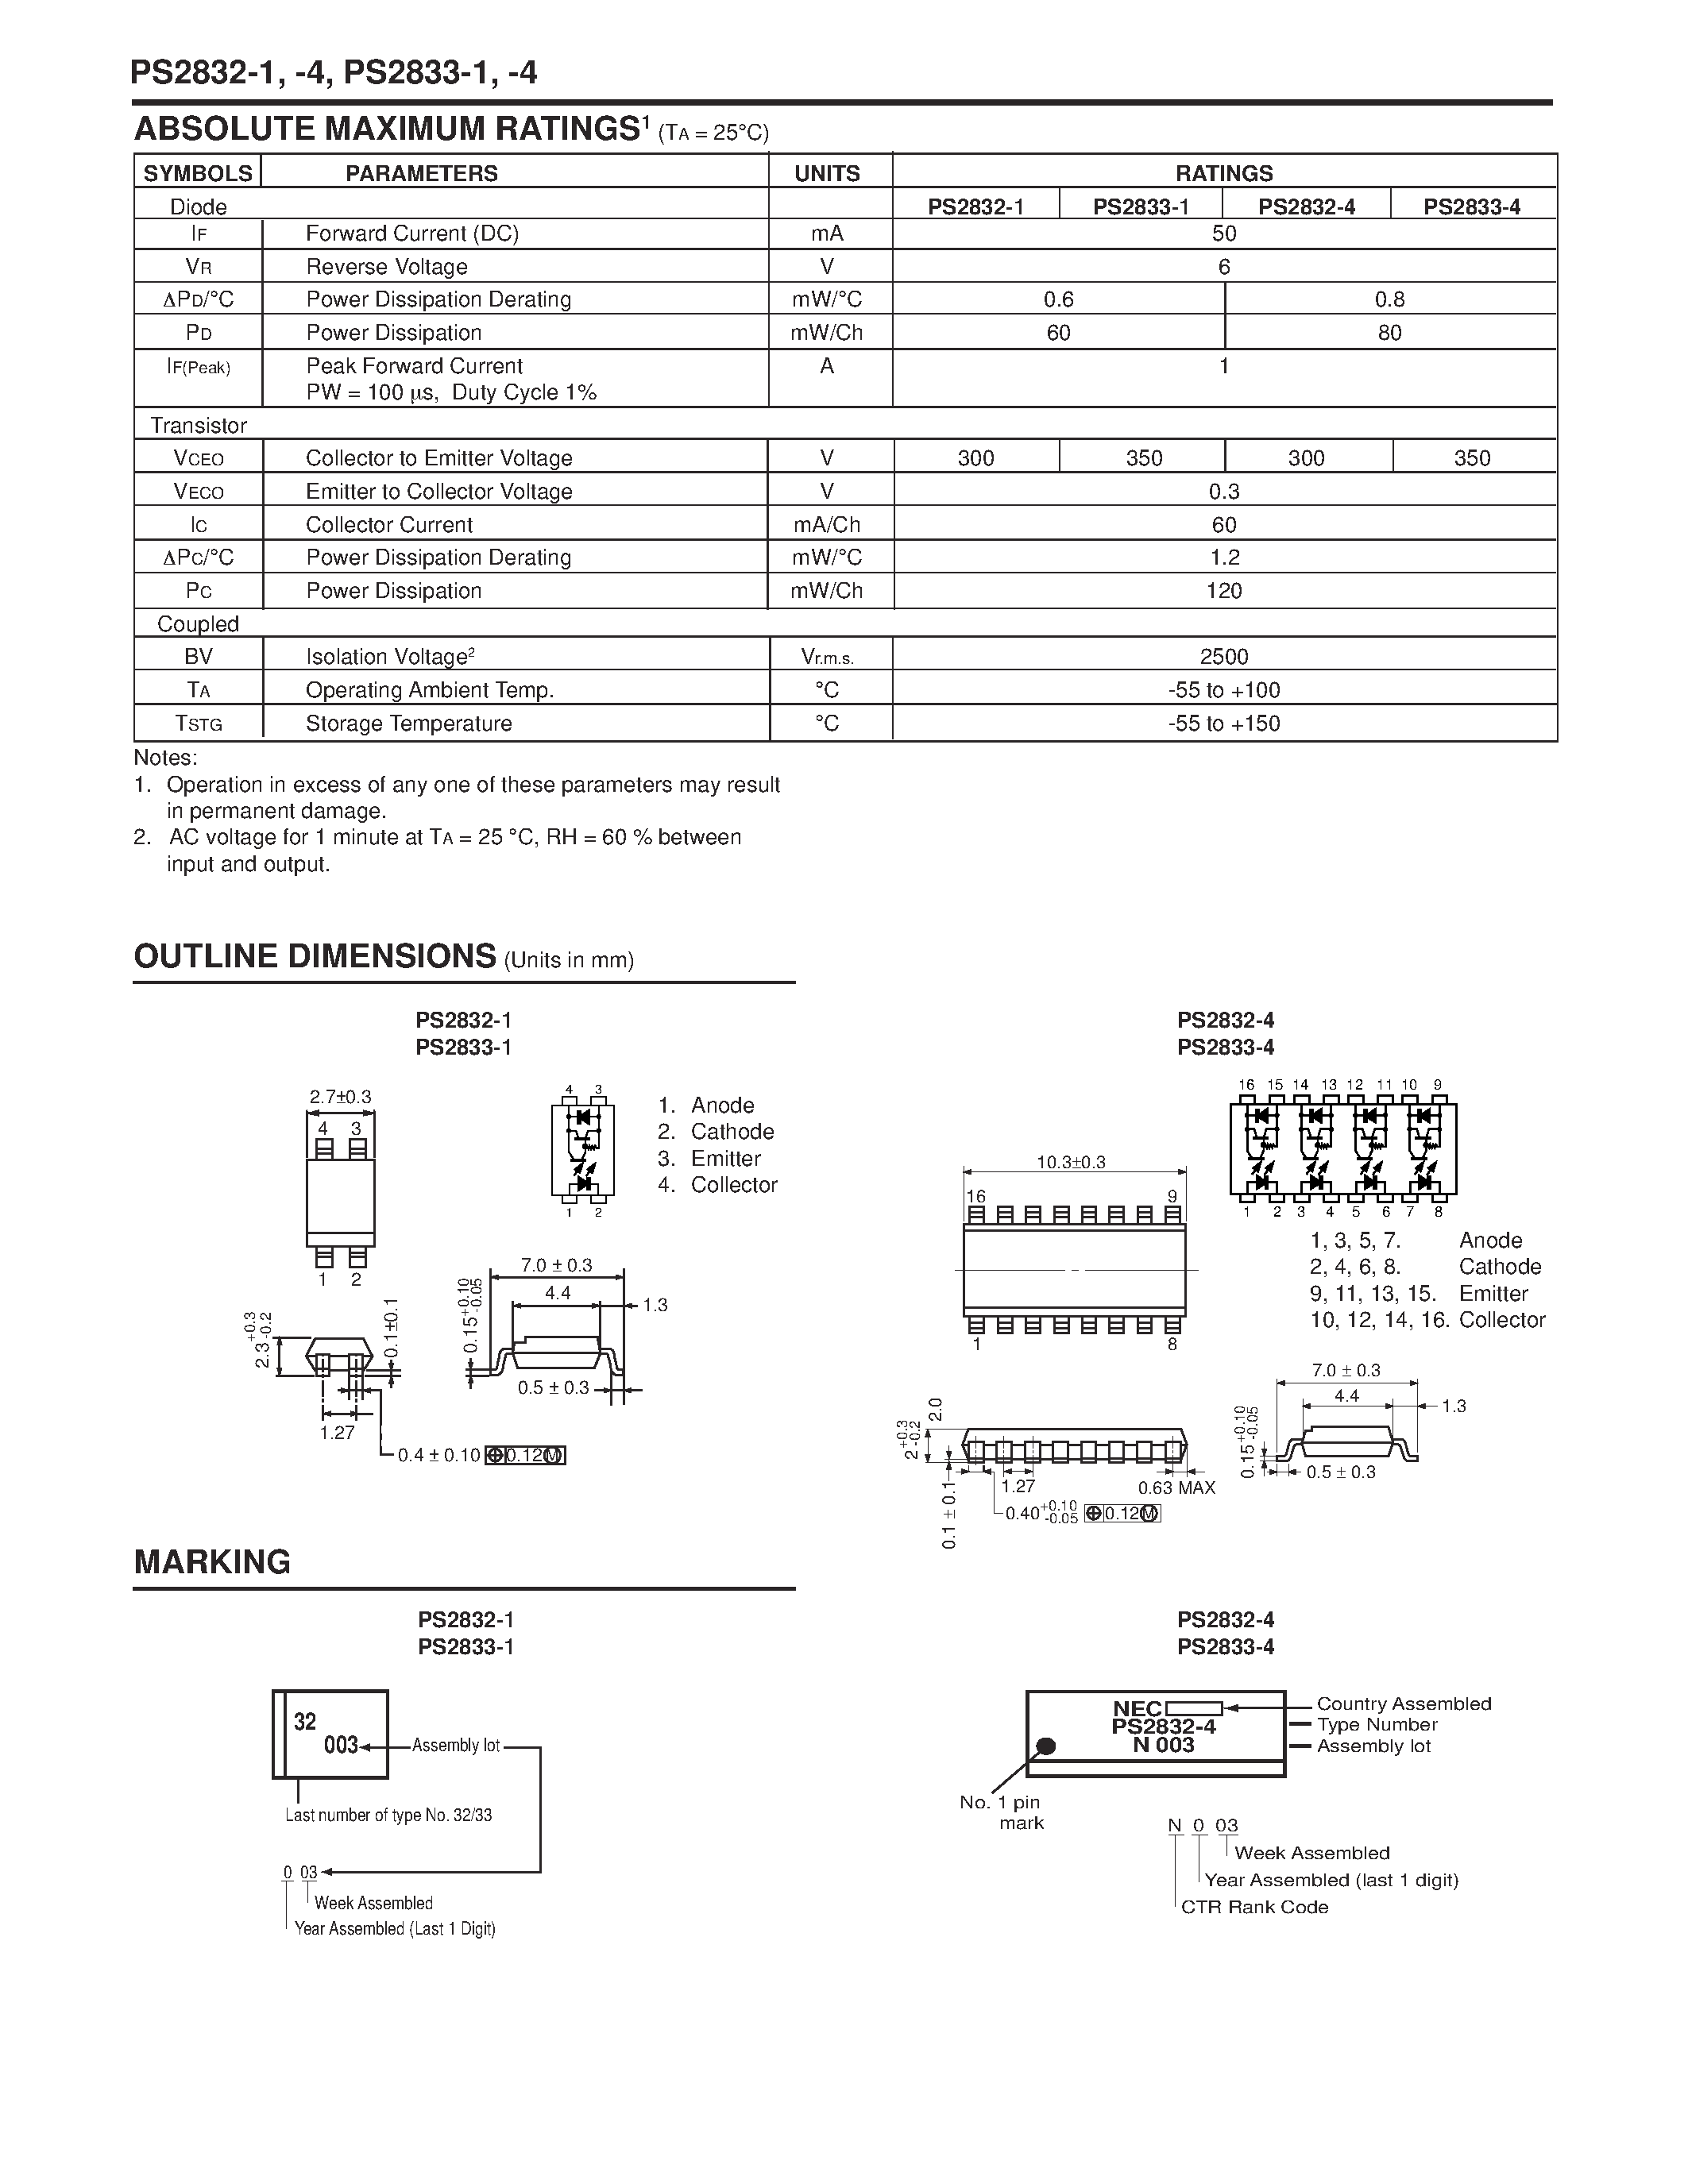 Datasheet PS2833-4-V-F3 - HIGH ISOLATION VOLTAGE HIGH COLLECTOR TO EMITTER VOLTAGE SOP MULTI OPTOCOUPLER page 2